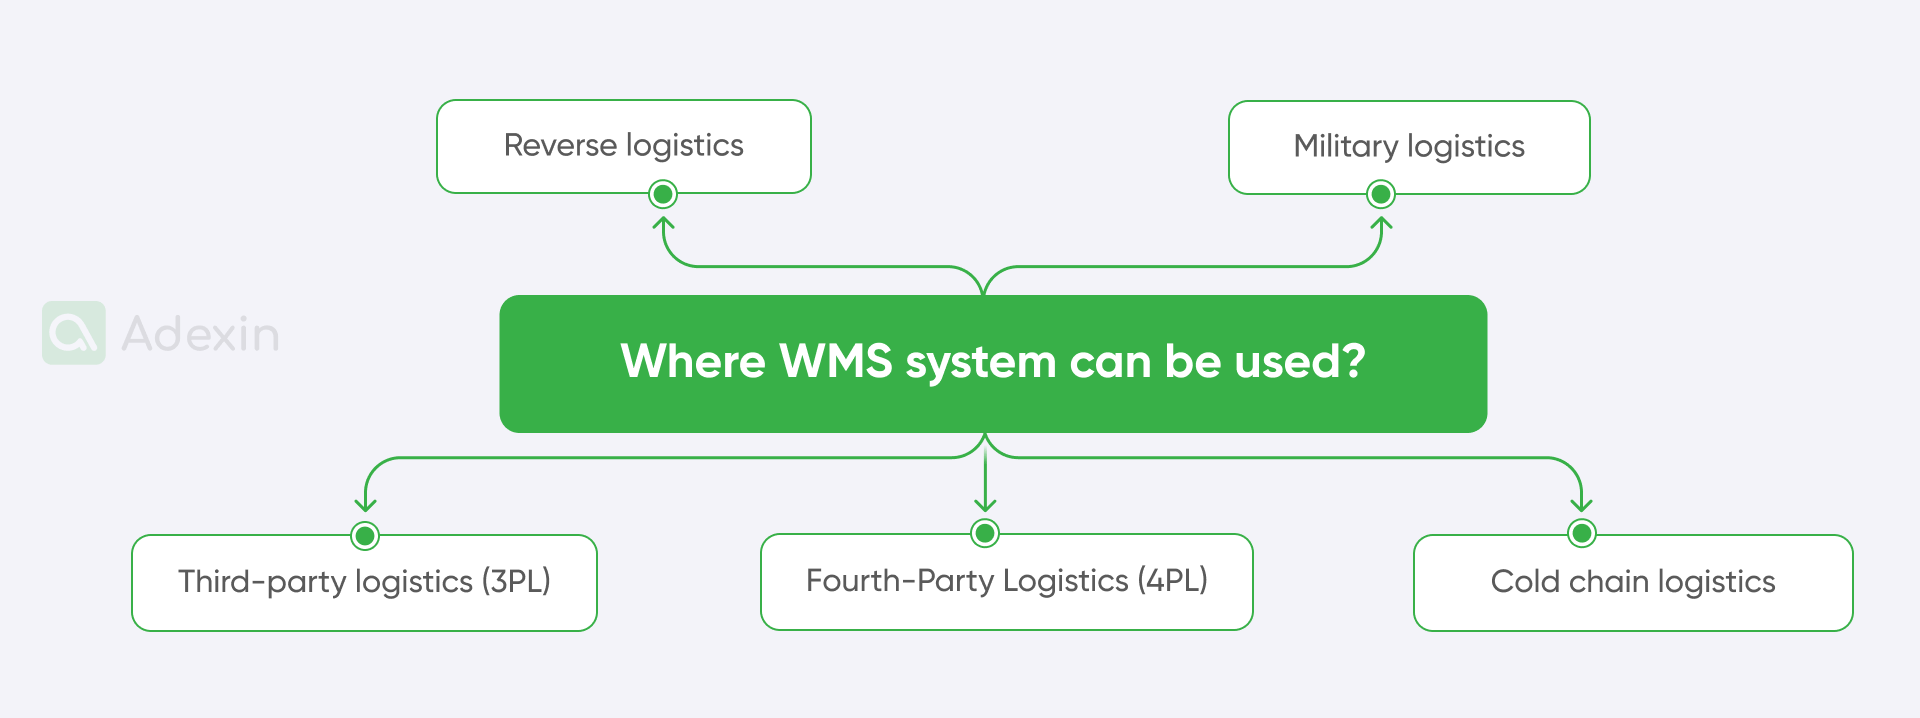 Areas WMS systems can be used